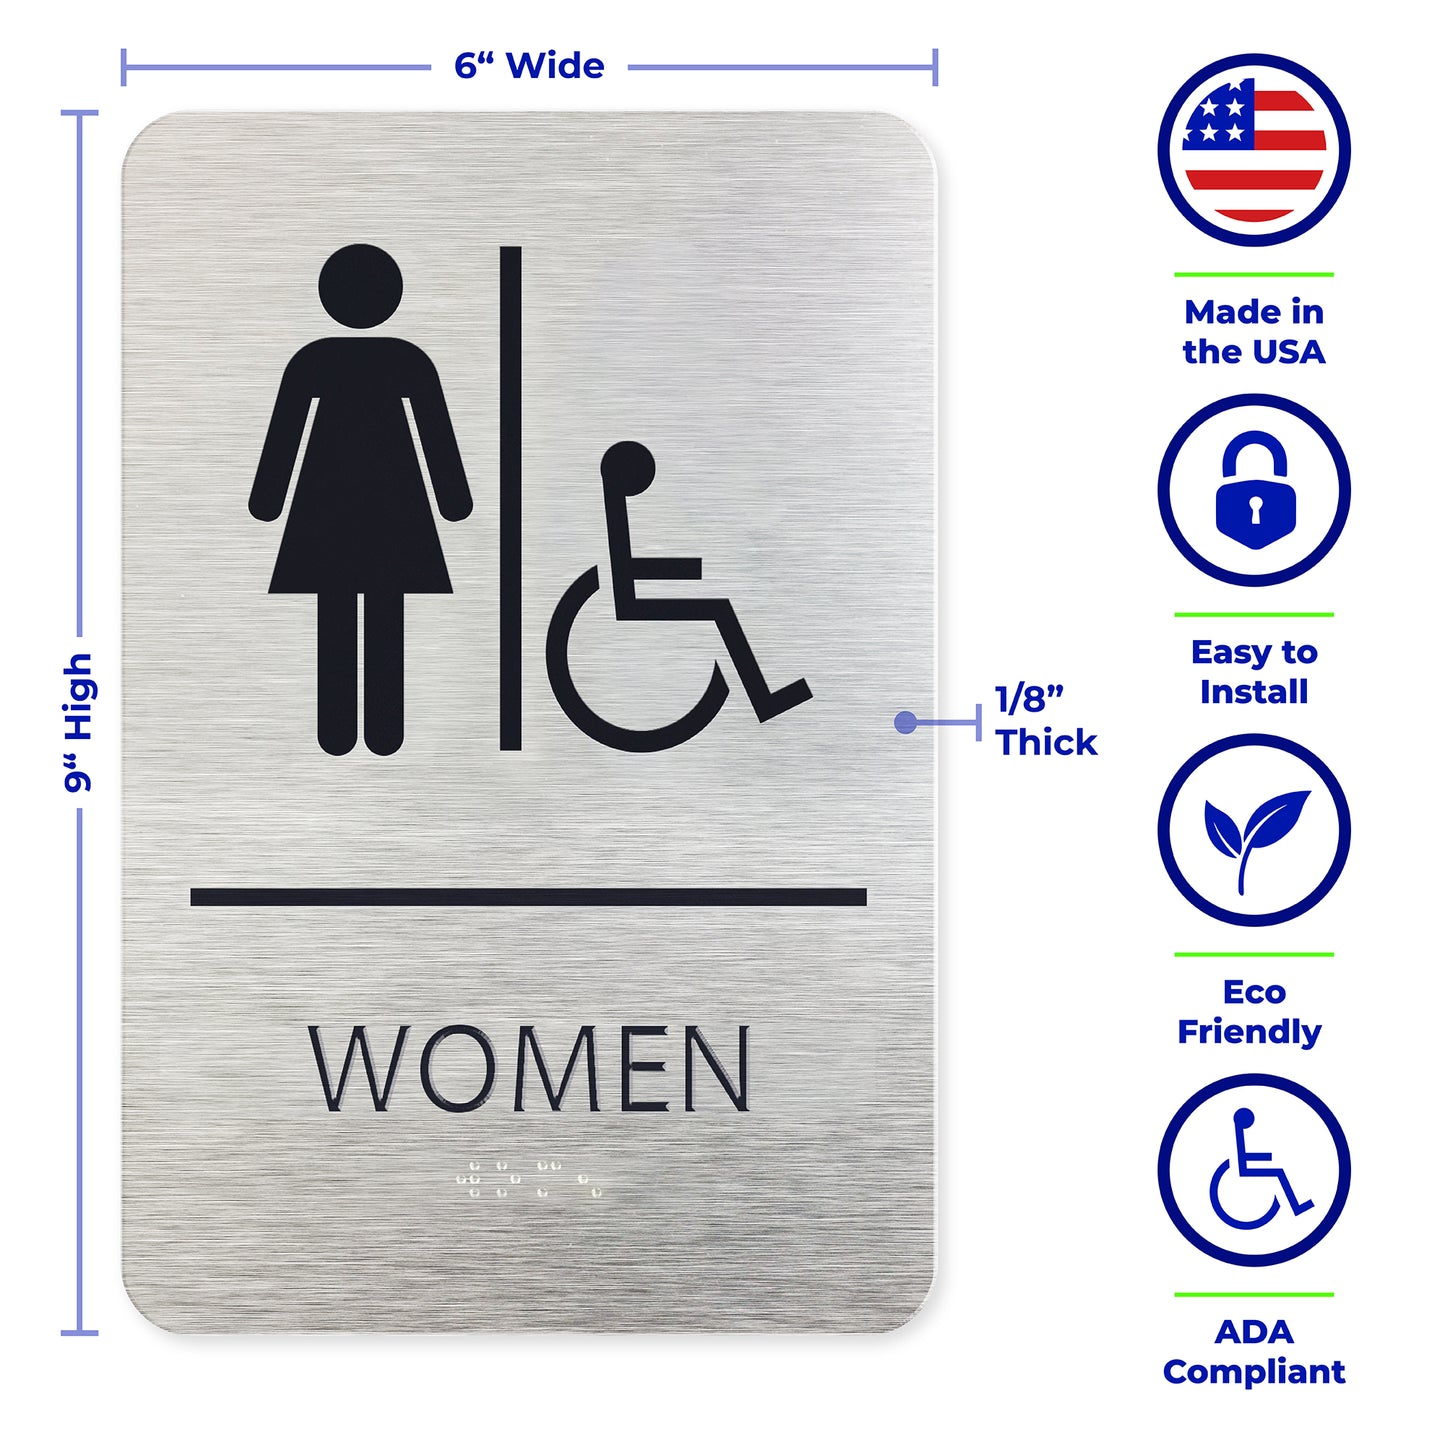 WOMEN Restroom Sign with Woman & Wheelchair Symbols, Brushed Silver, Black Raised Text, Grade II Braille, 6"x 9"